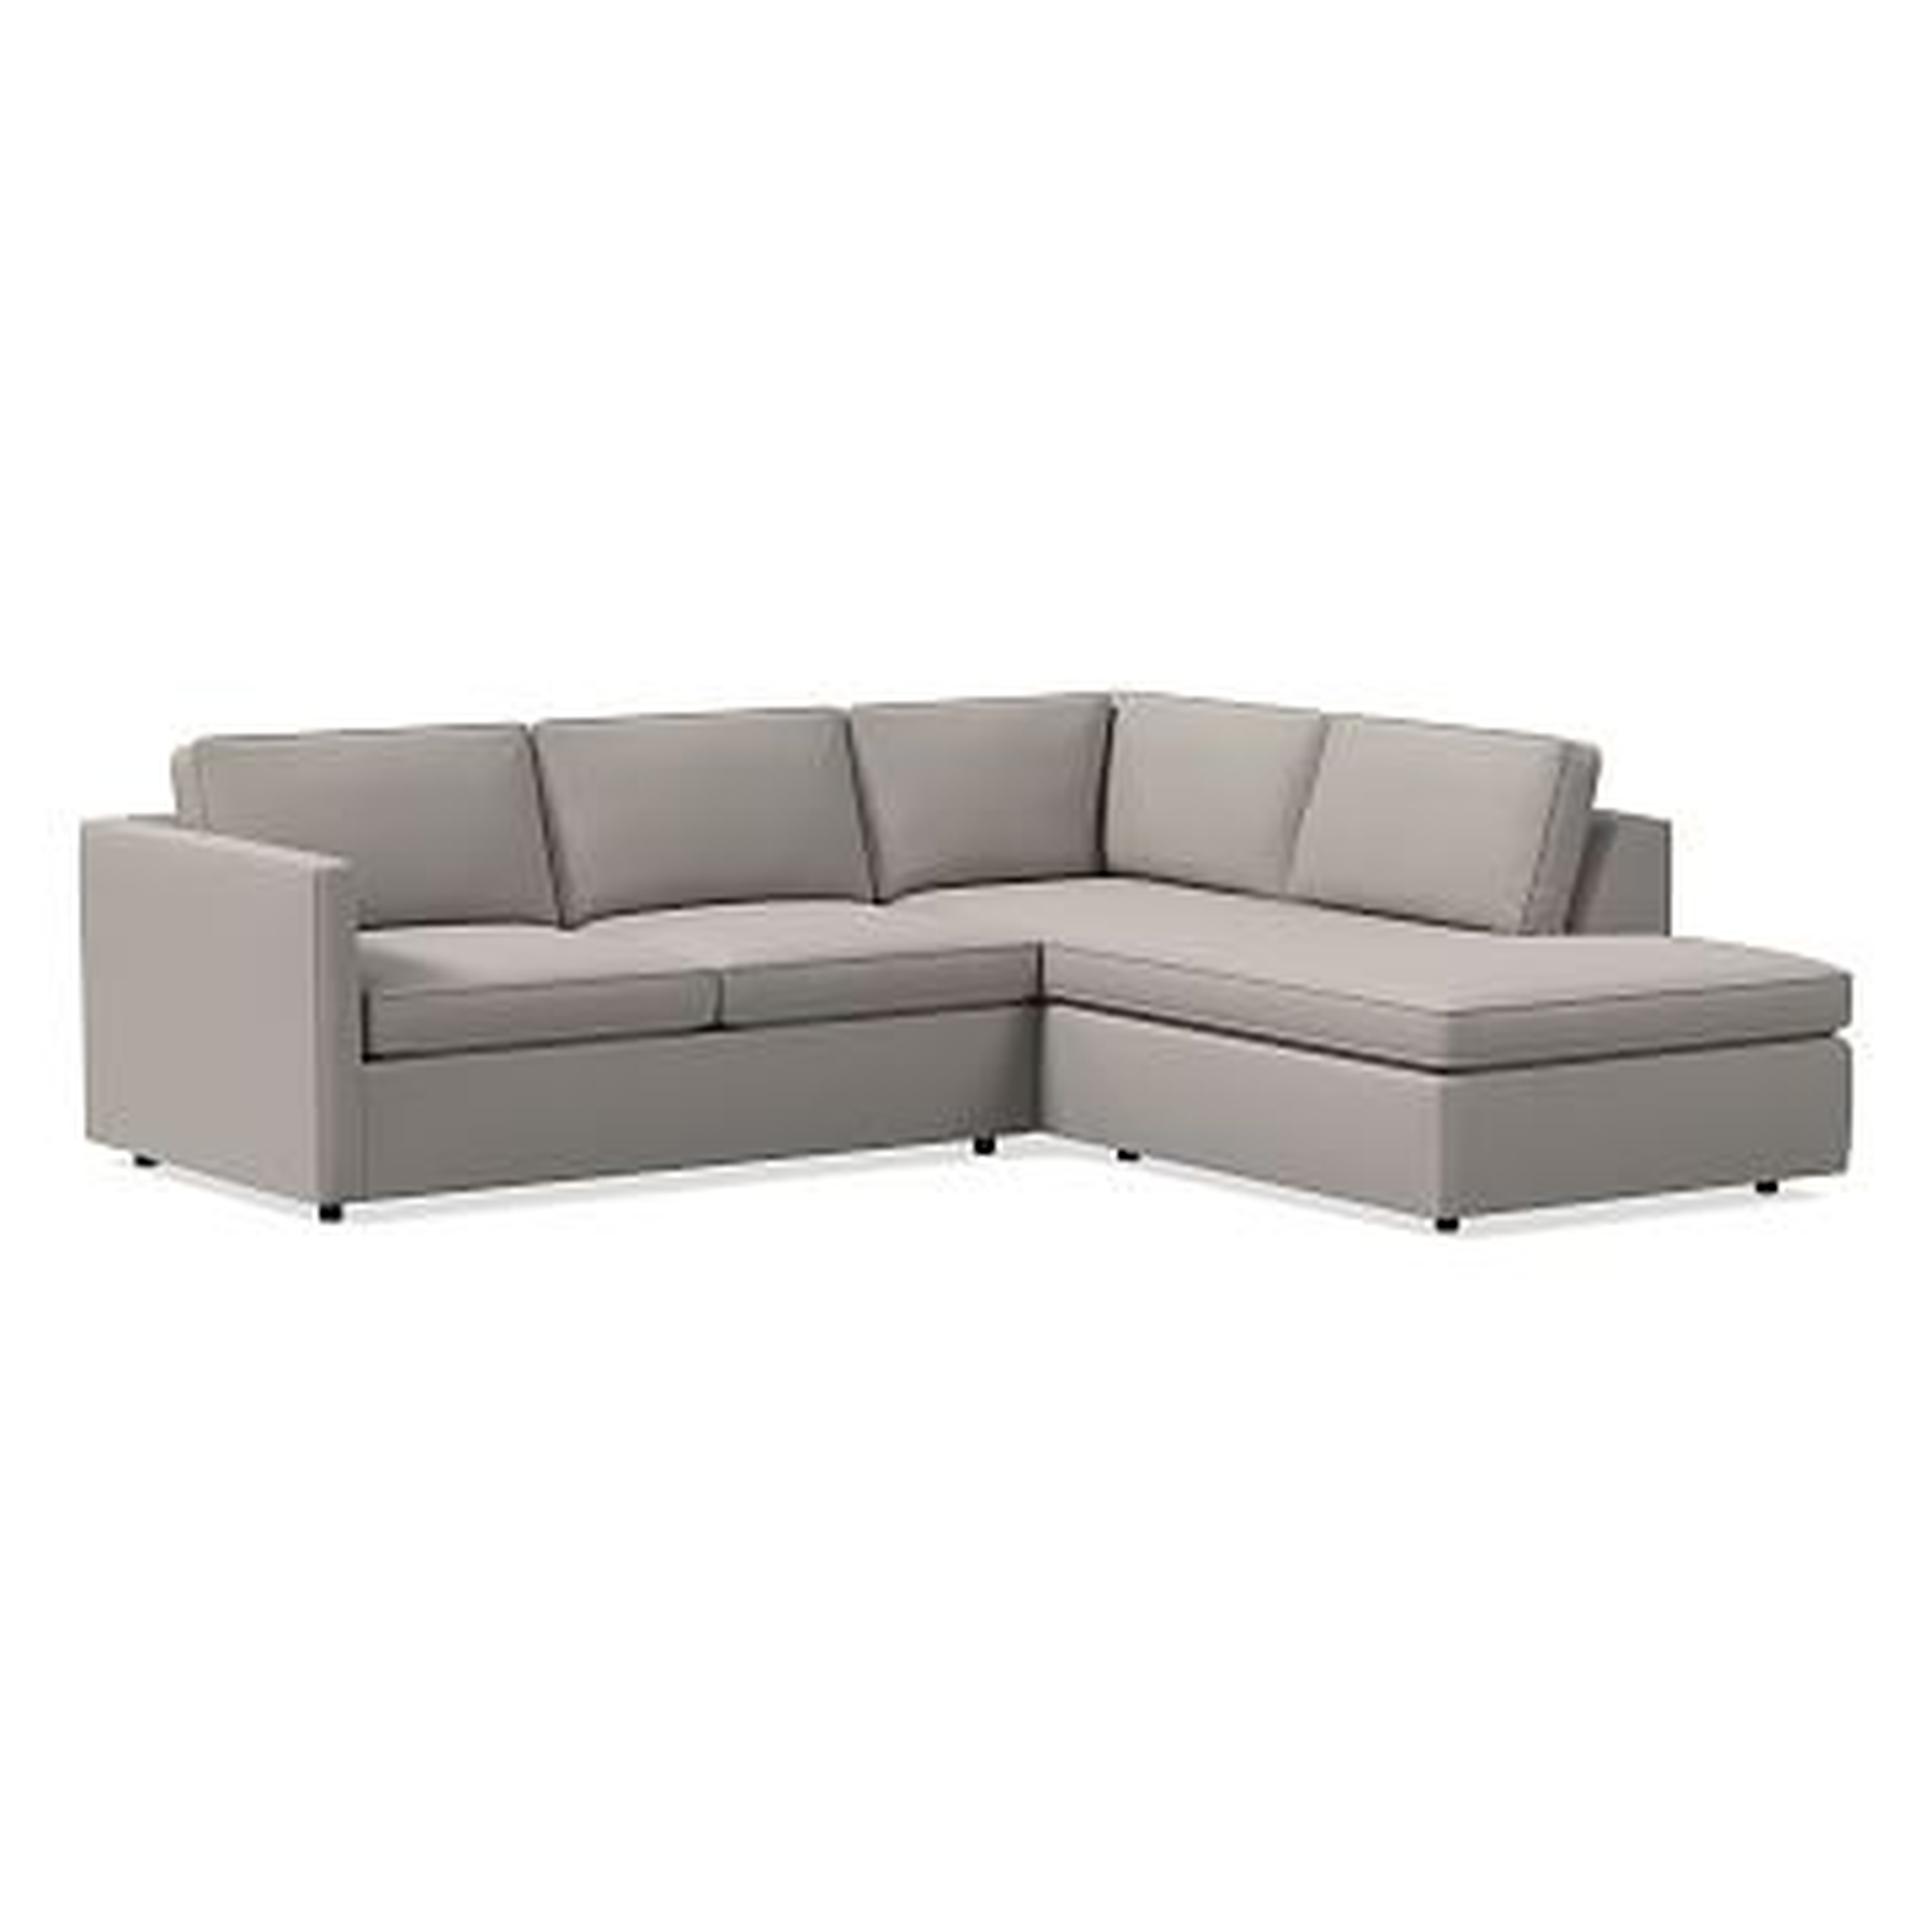 Harris Sectional Set 09: LA 65" Sofa, RA Terminal Chaise, Poly , Performance Velvet, Silver, Concealed Supports - West Elm